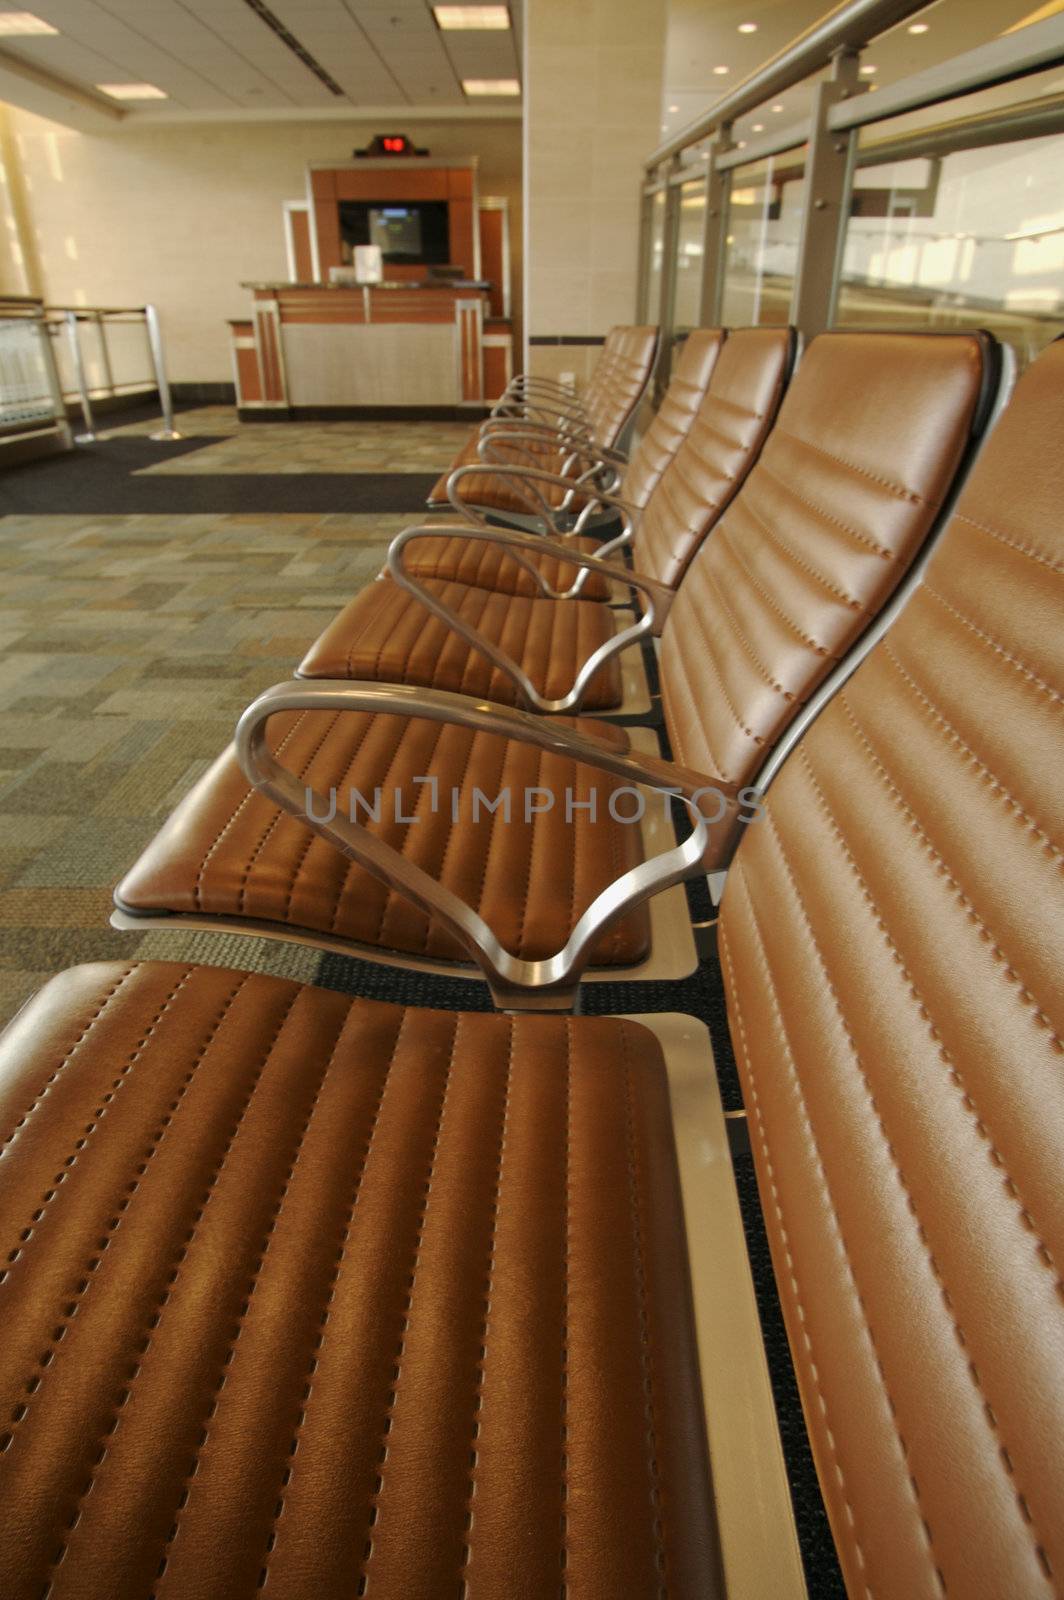 Airport Seating Abstract by Feverpitched